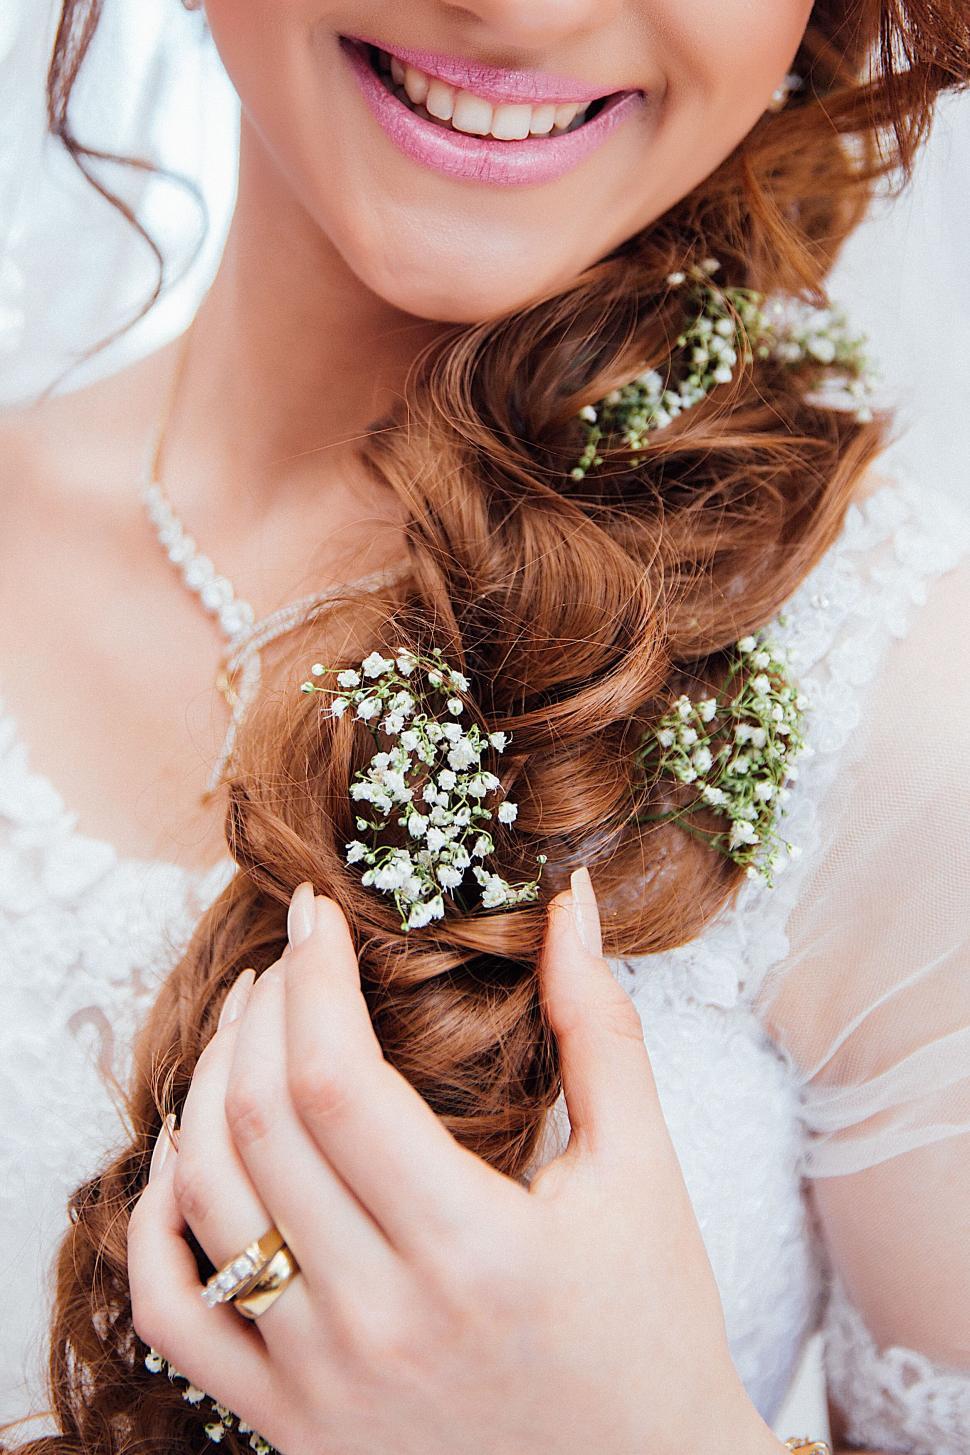 Free Image of A woman with flowers in her hair 